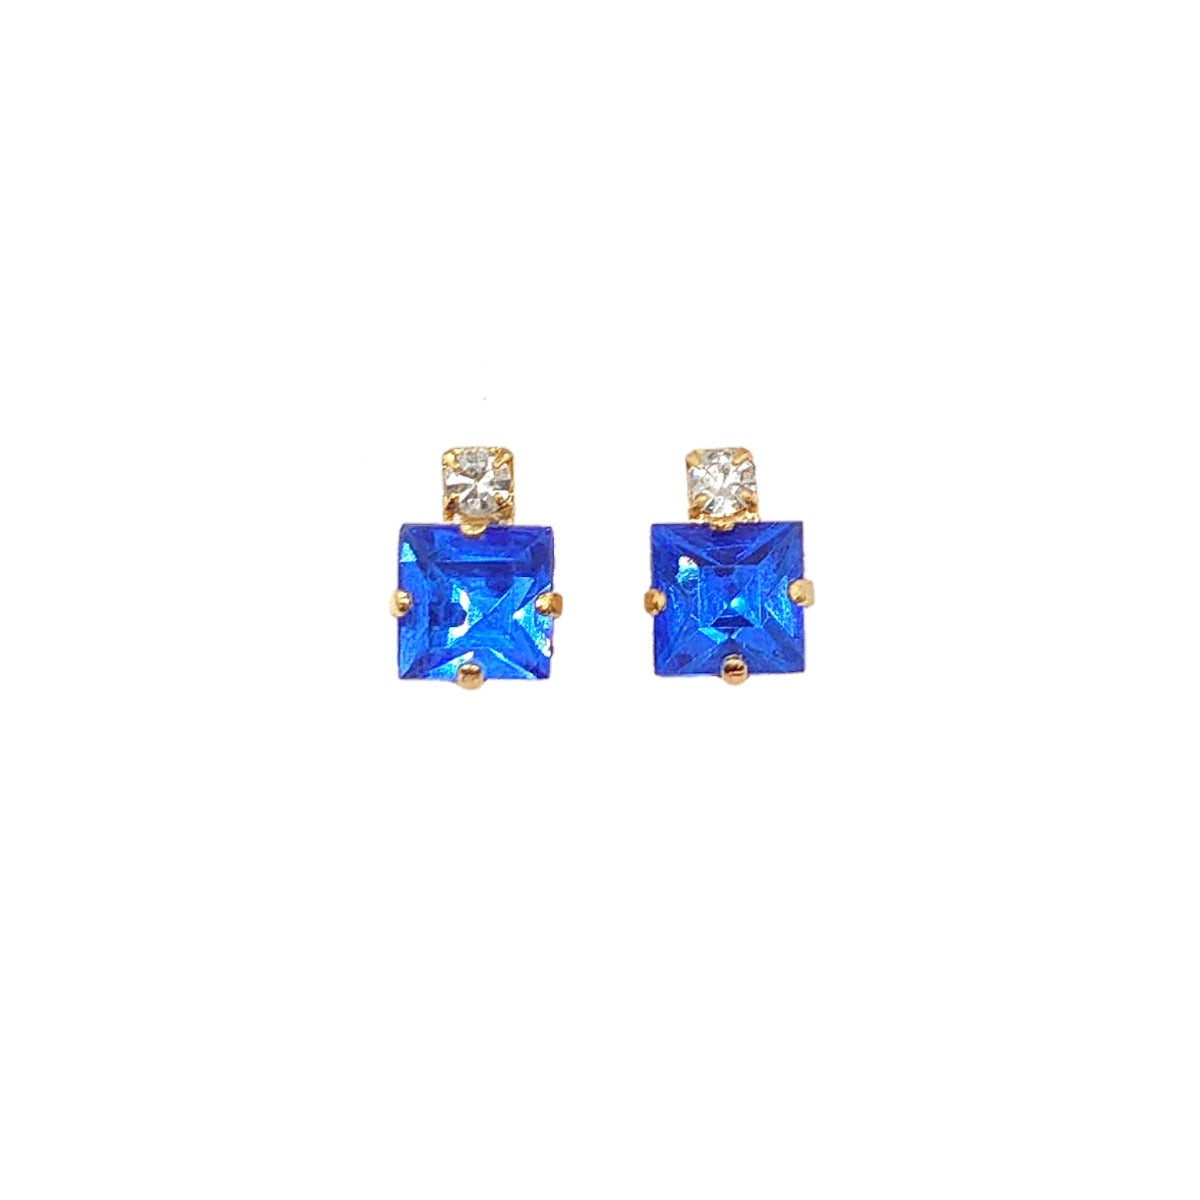 Small Square Earrings - Swarovski Crystals - Gold Fittings